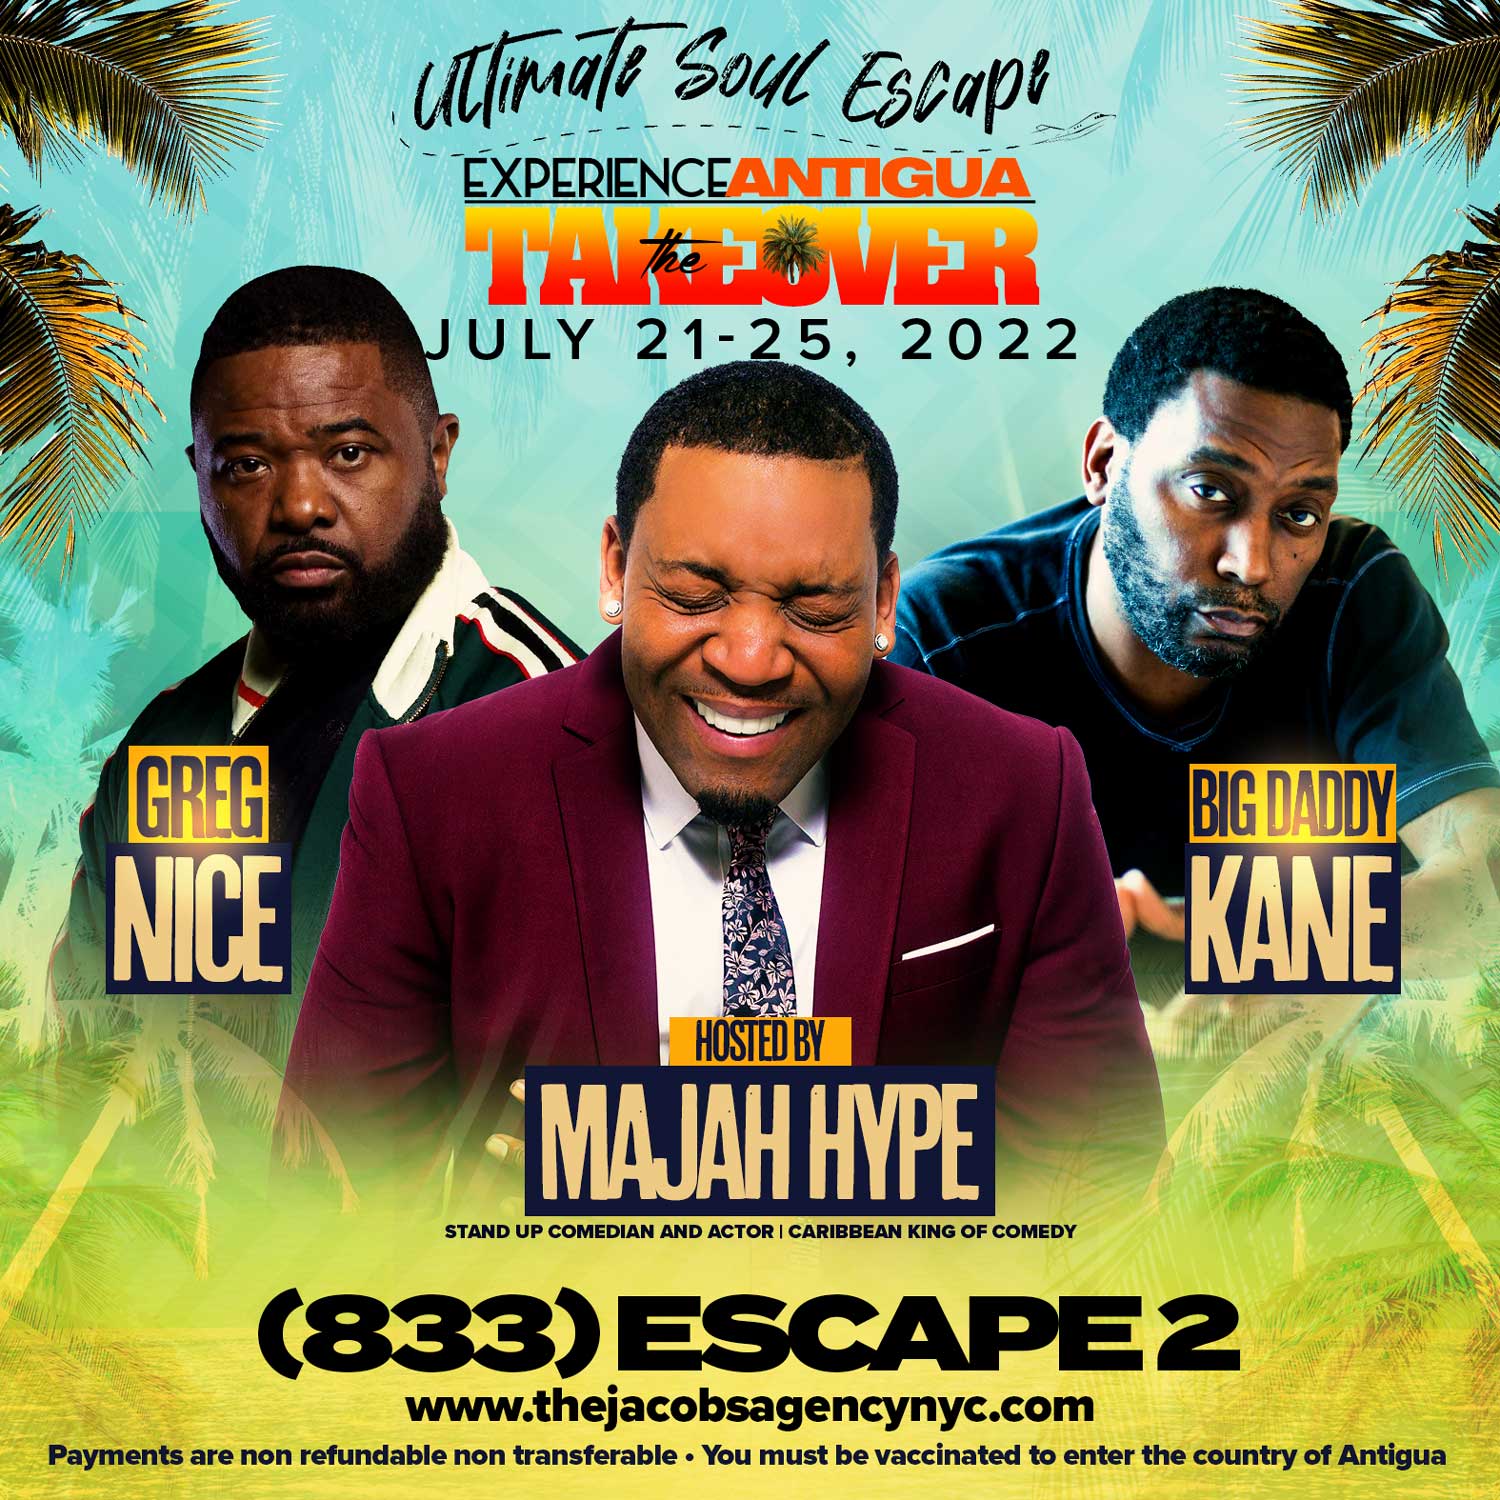 Antigua the Take Over Hosted by The Ultimate Soul Escape (USE) Live Performance by Big Daddy Kane Performance by Greg Nice Celebrity Master of Ceremonies Majah Hype Newswire